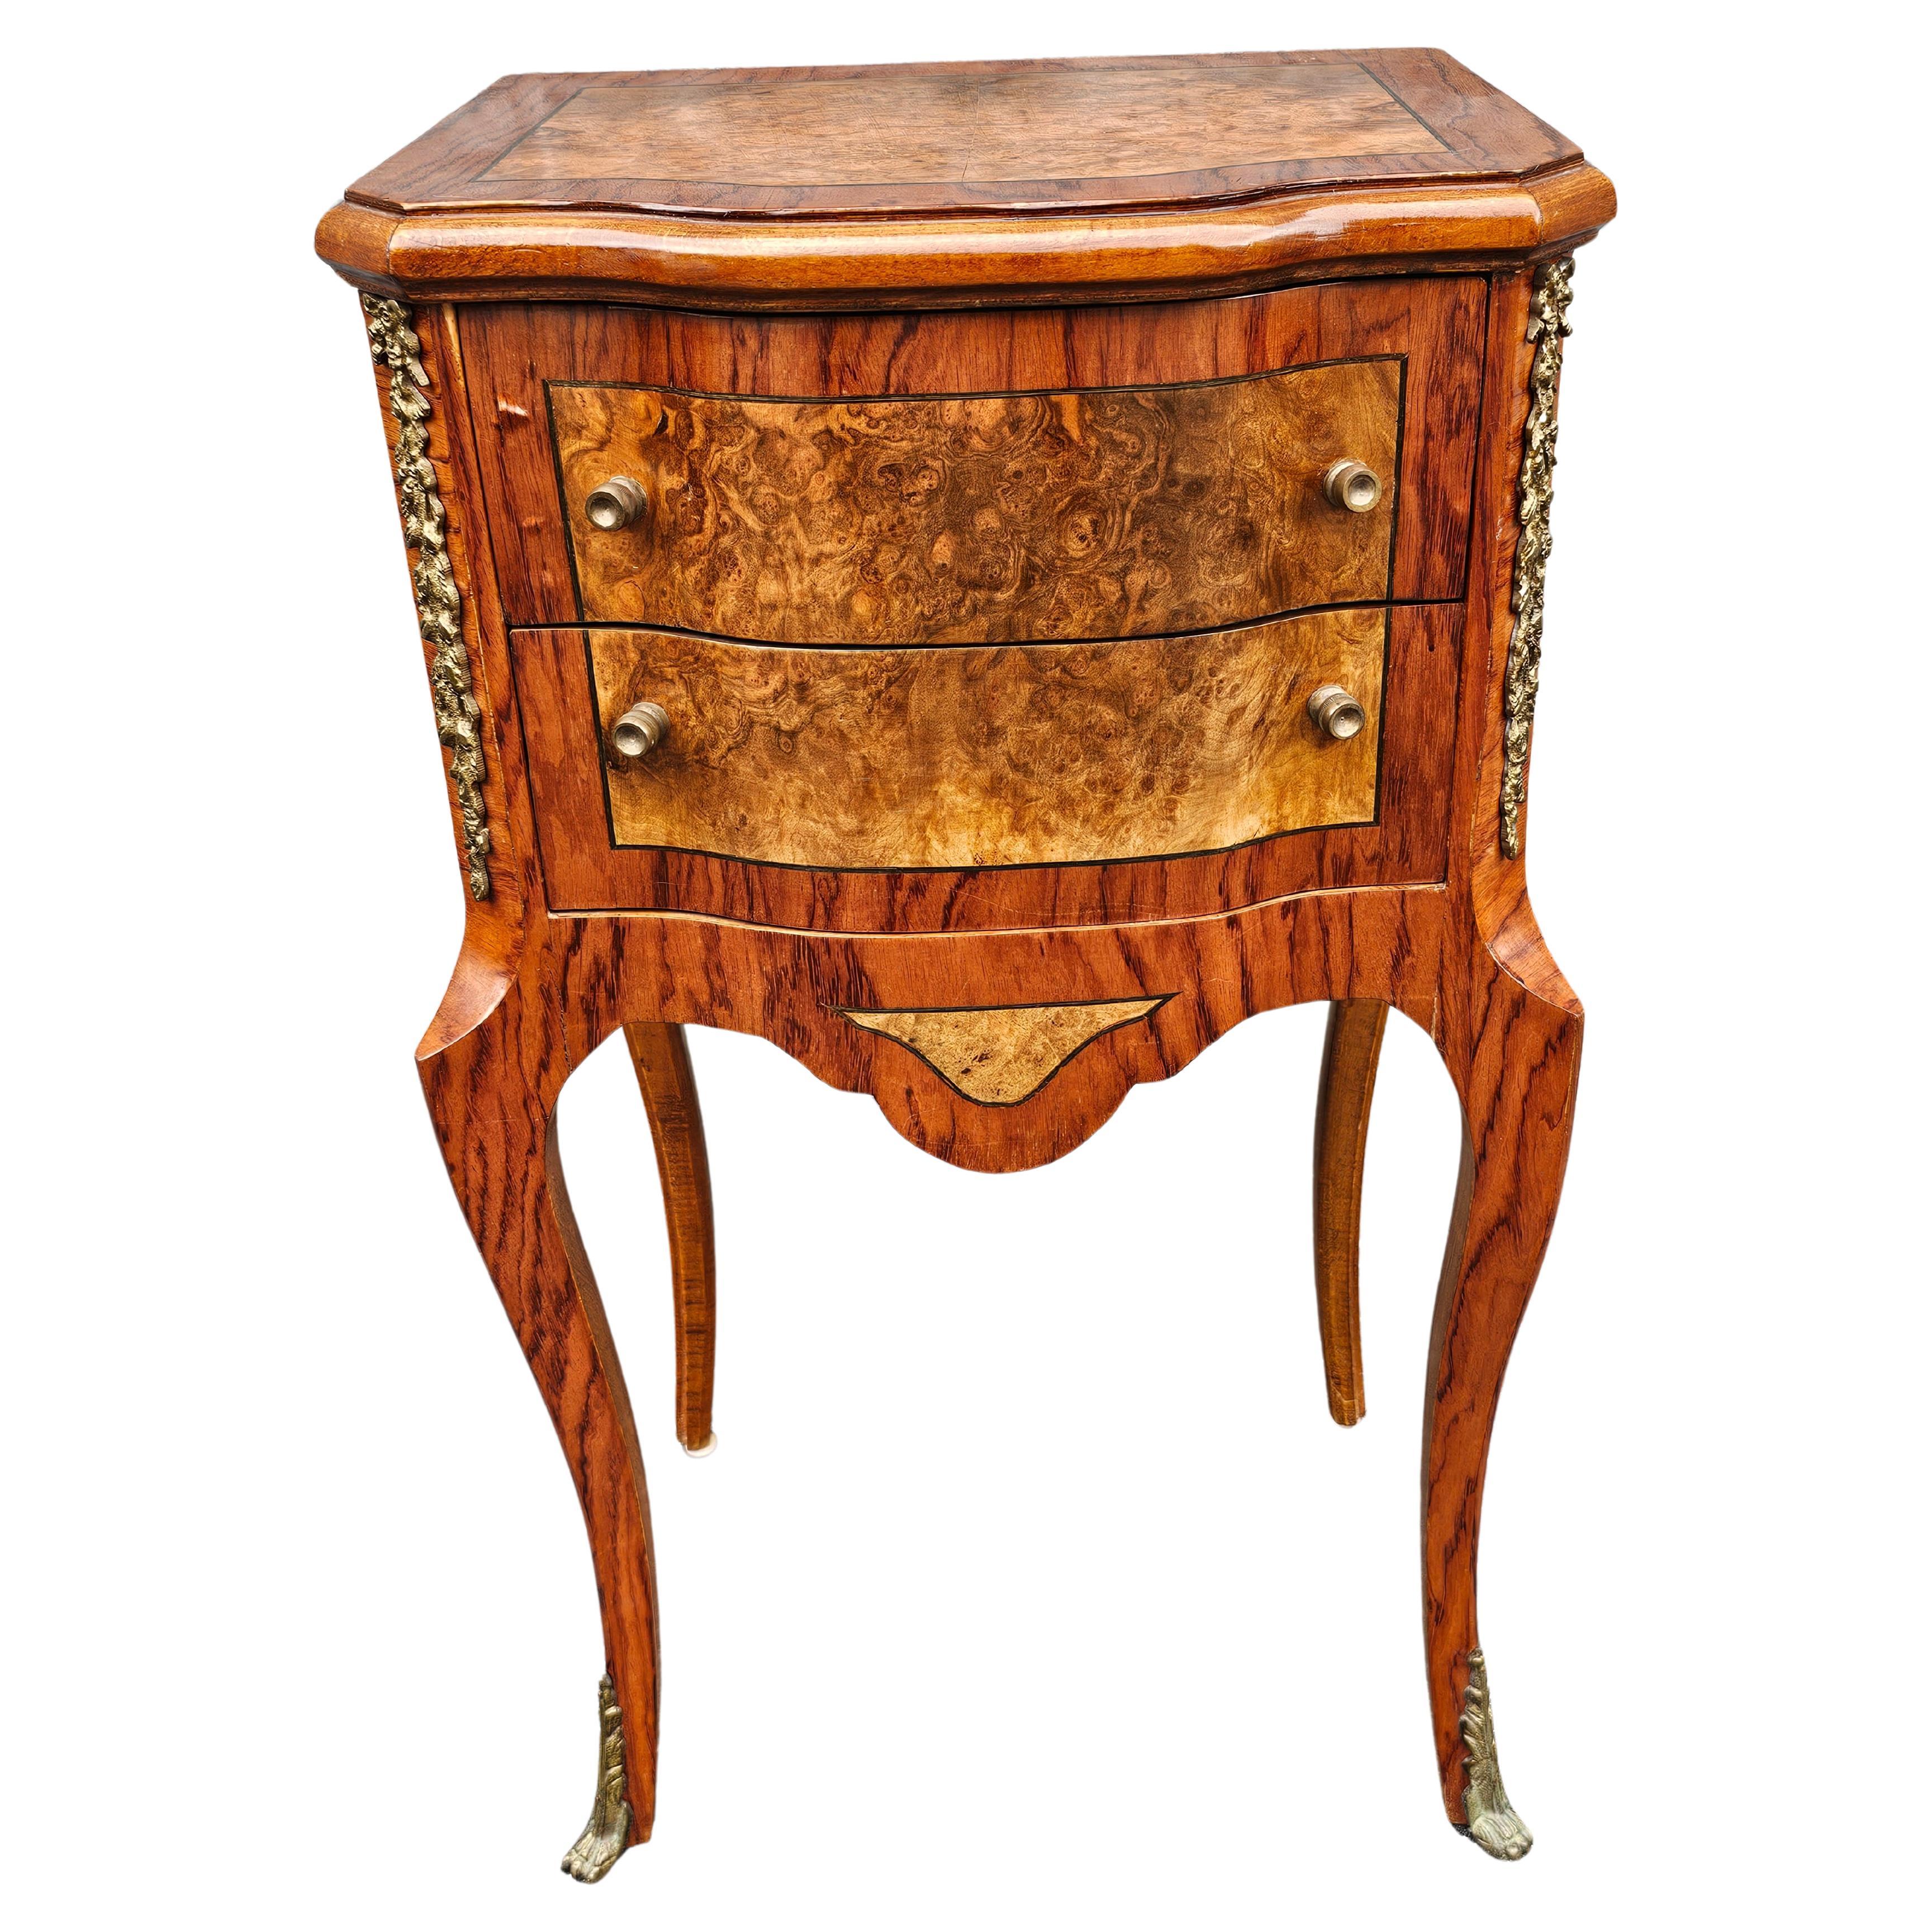 Early 20th Century Louis XV Style Brass Mounted Inlaid Burl Fruitwood Side Table For Sale